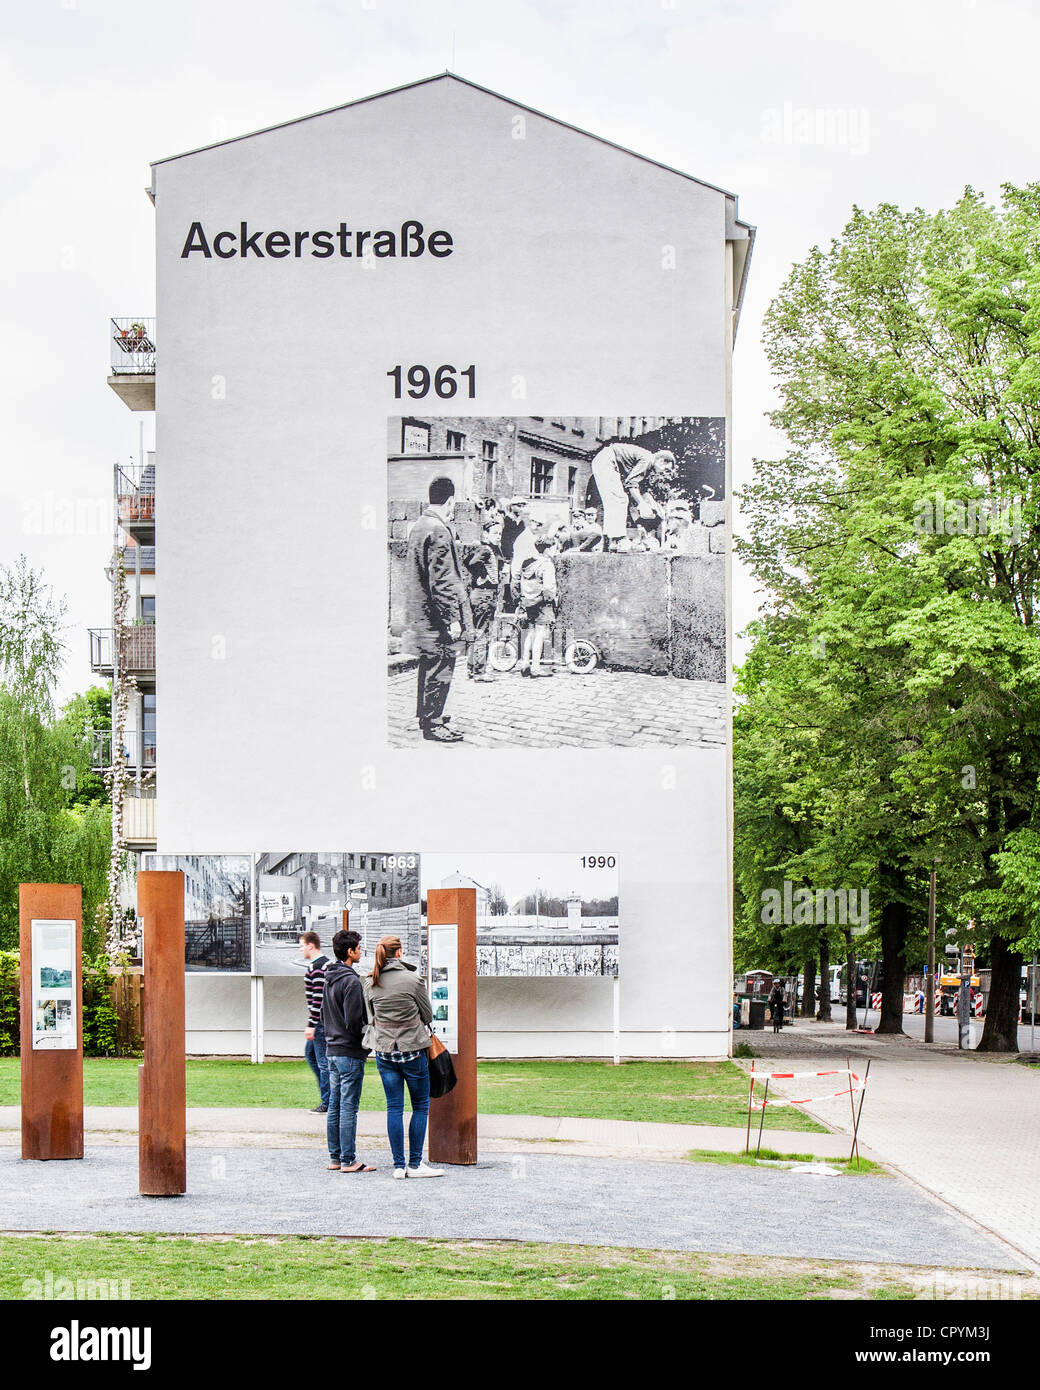 Berlin Wall Memorial - Pictures on buildings and rusty columns recall the history of a divided city. Stock Photo